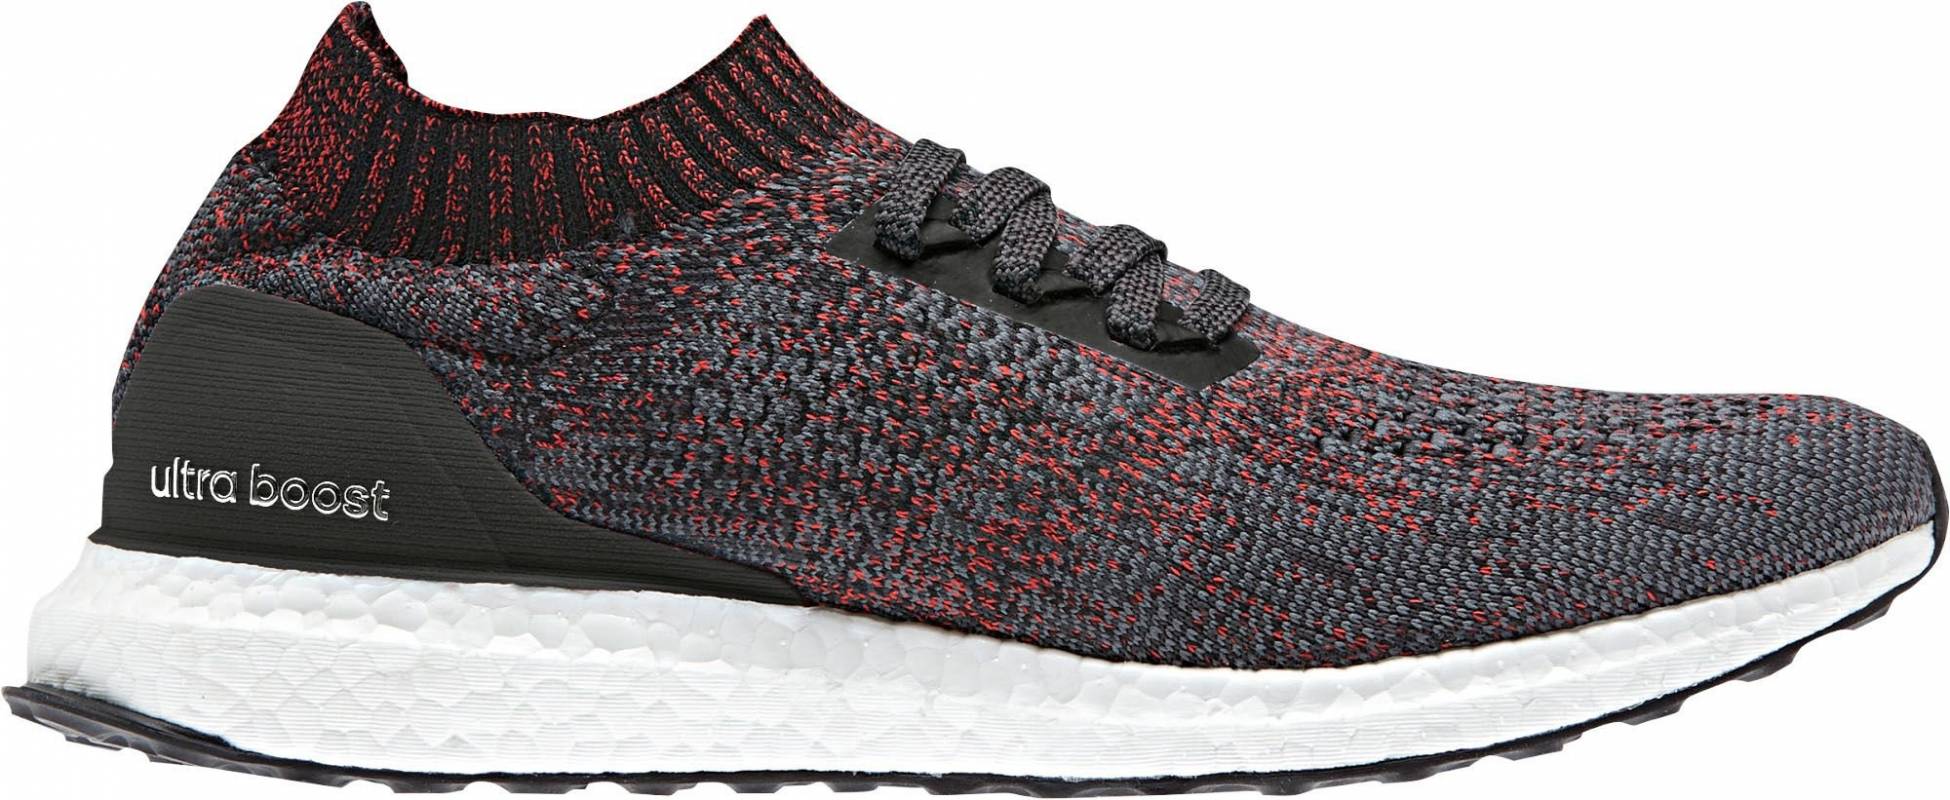 Review of Adidas Ultraboost Uncaged 